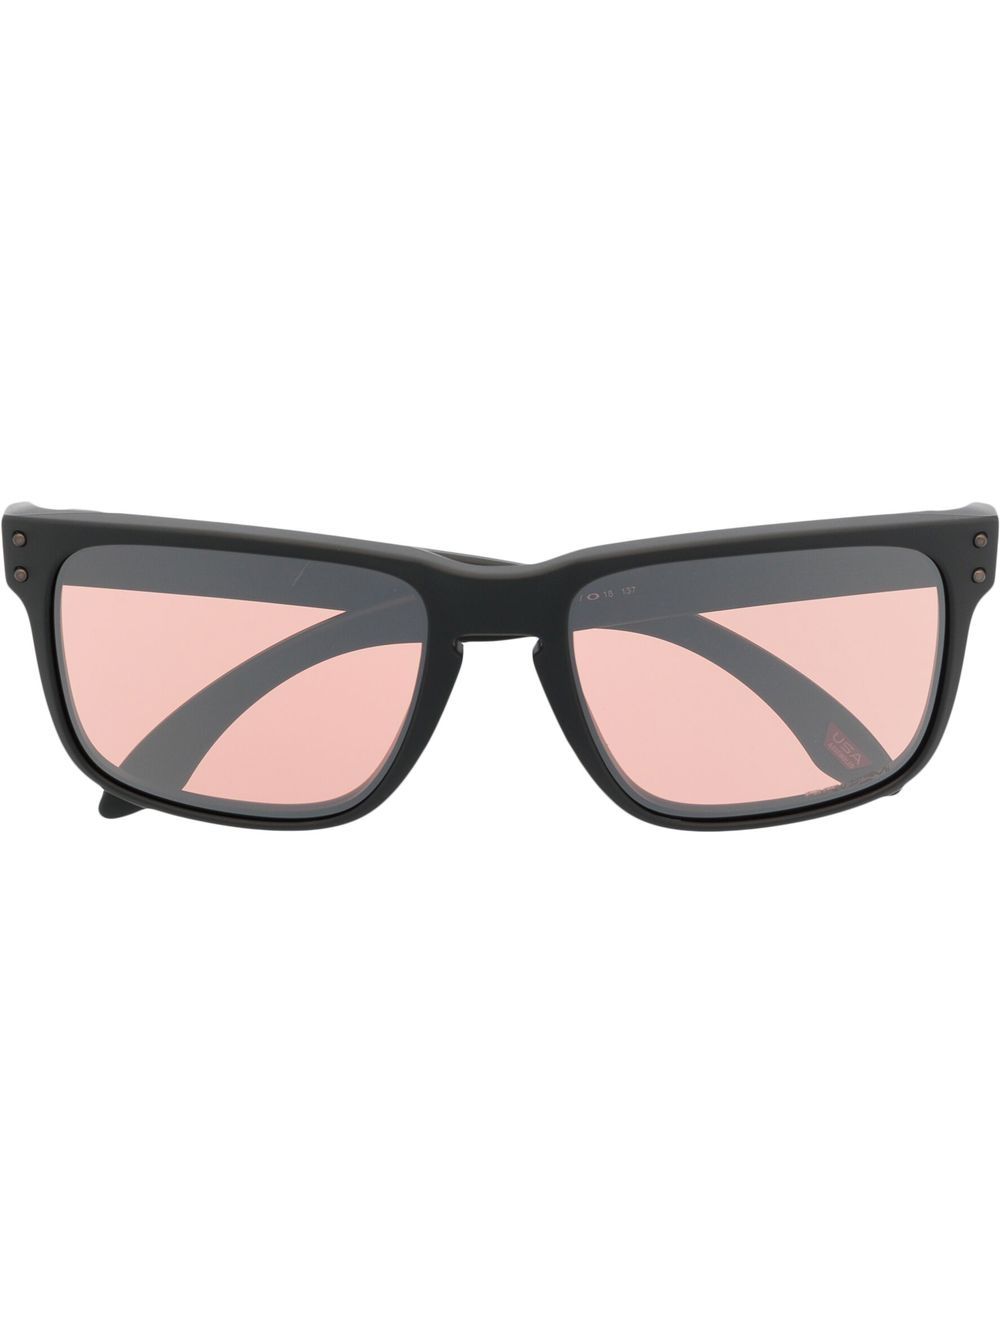 Pink tinted square frame sunglasses